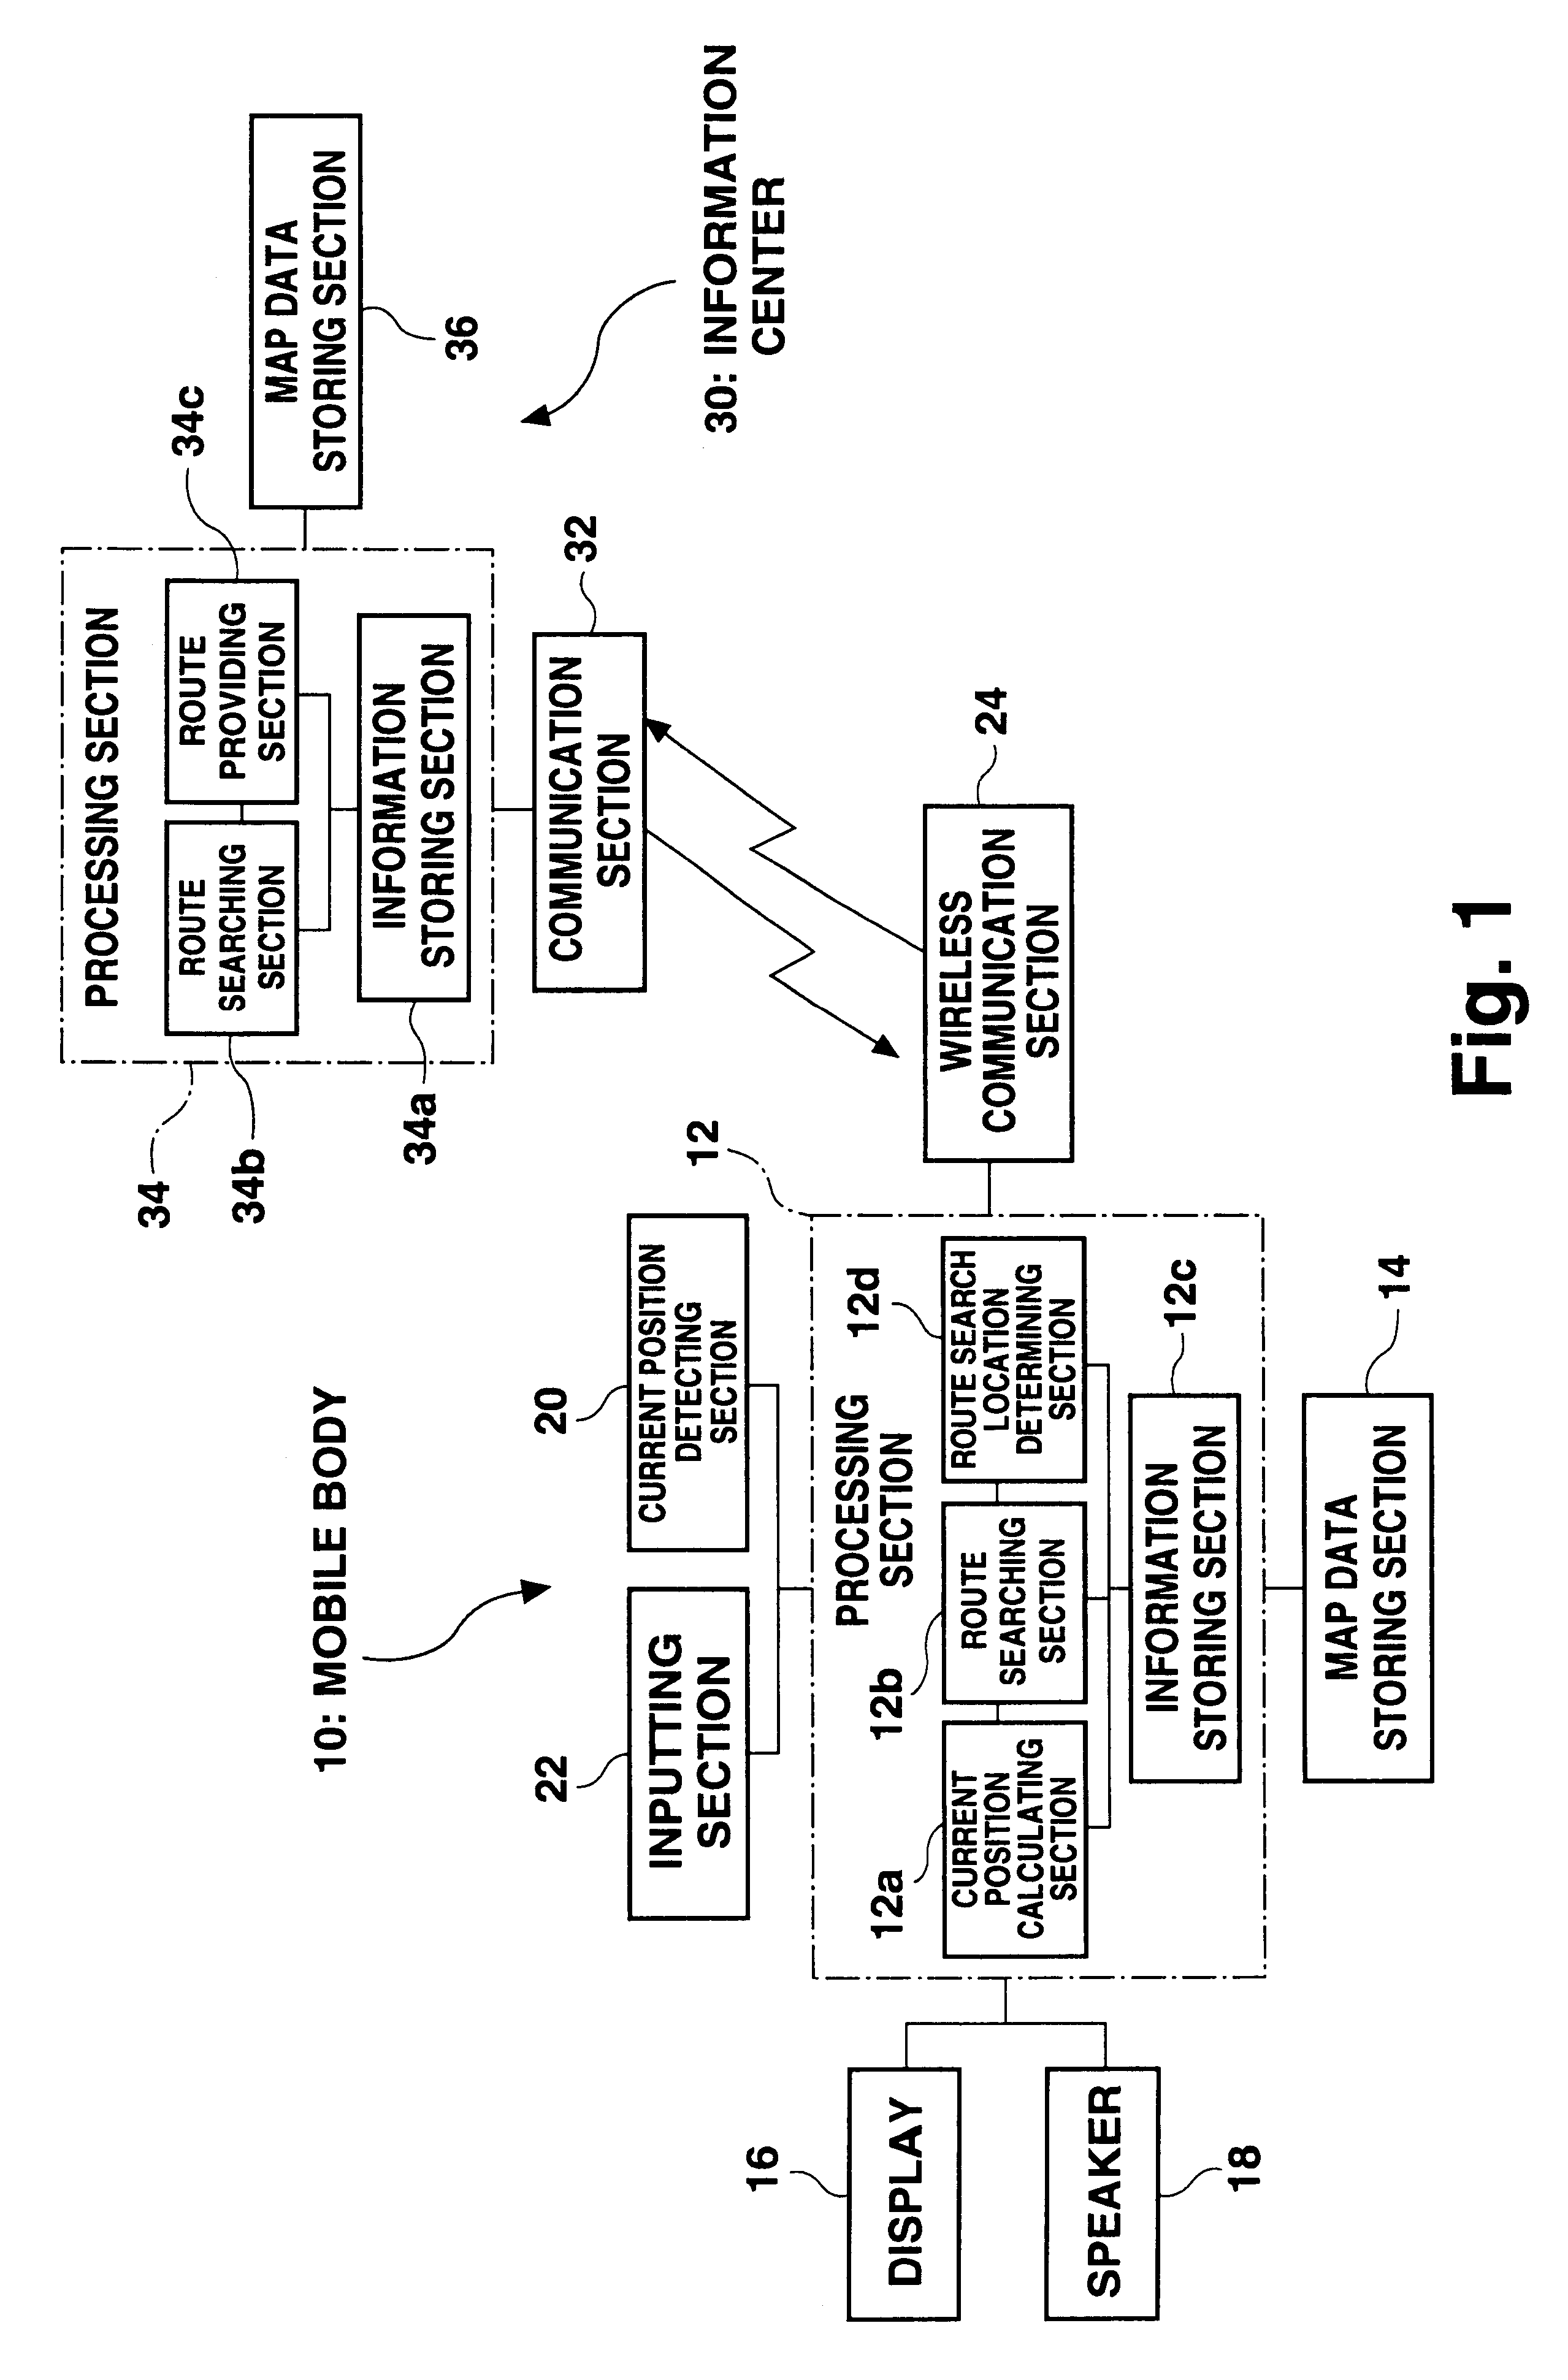 Navigation device and method of use having two separate route searching devices